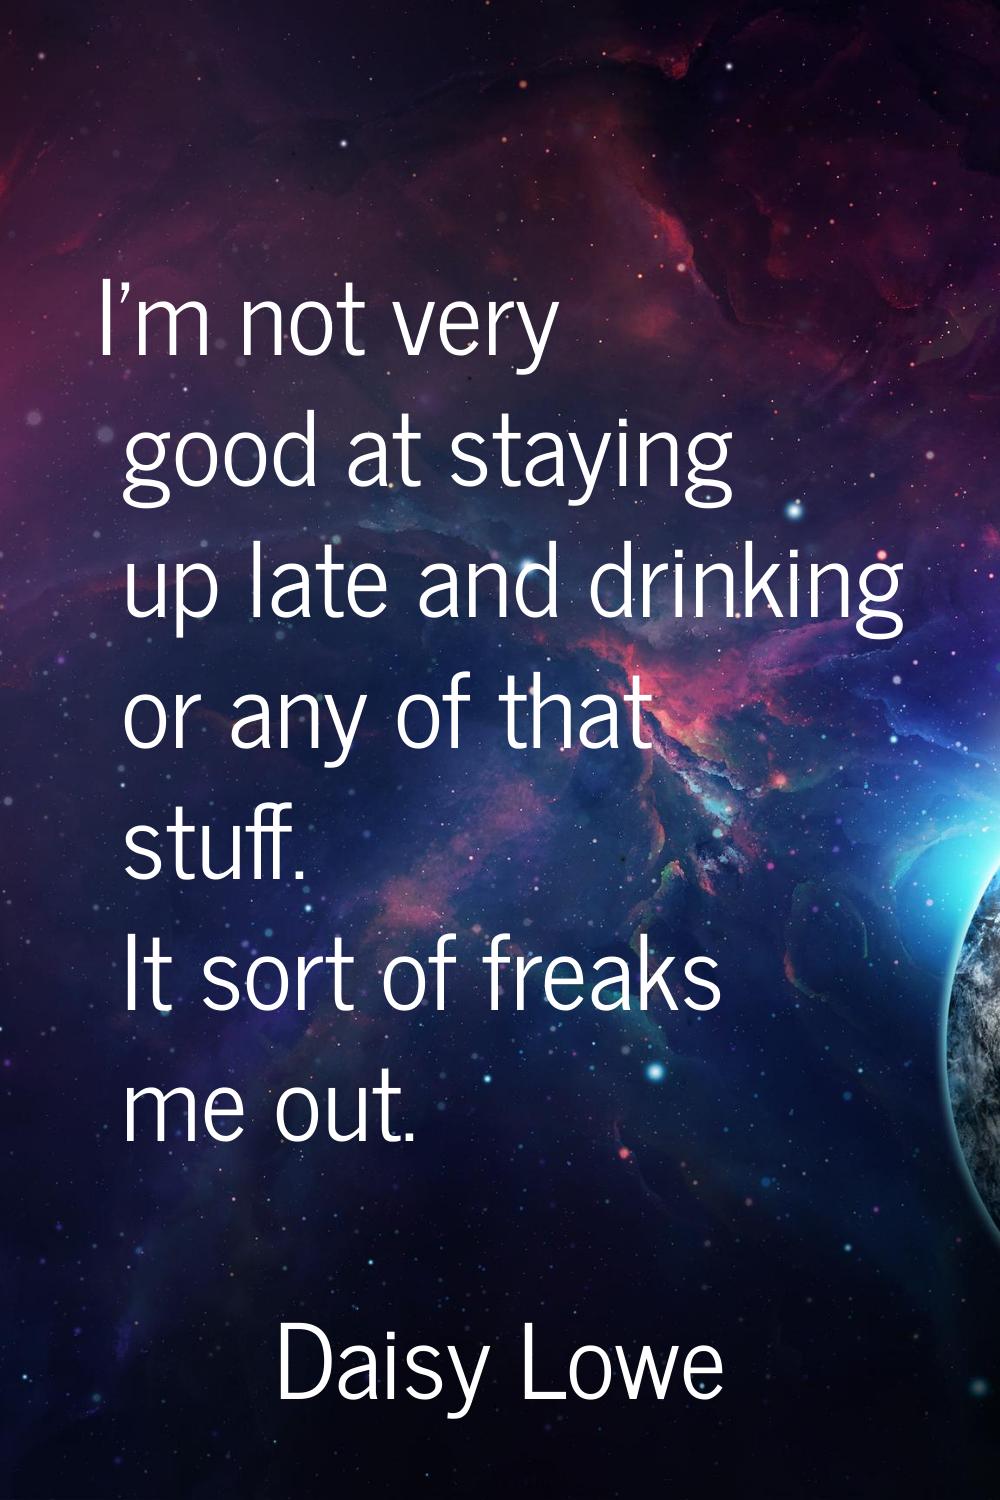 I'm not very good at staying up late and drinking or any of that stuff. It sort of freaks me out.